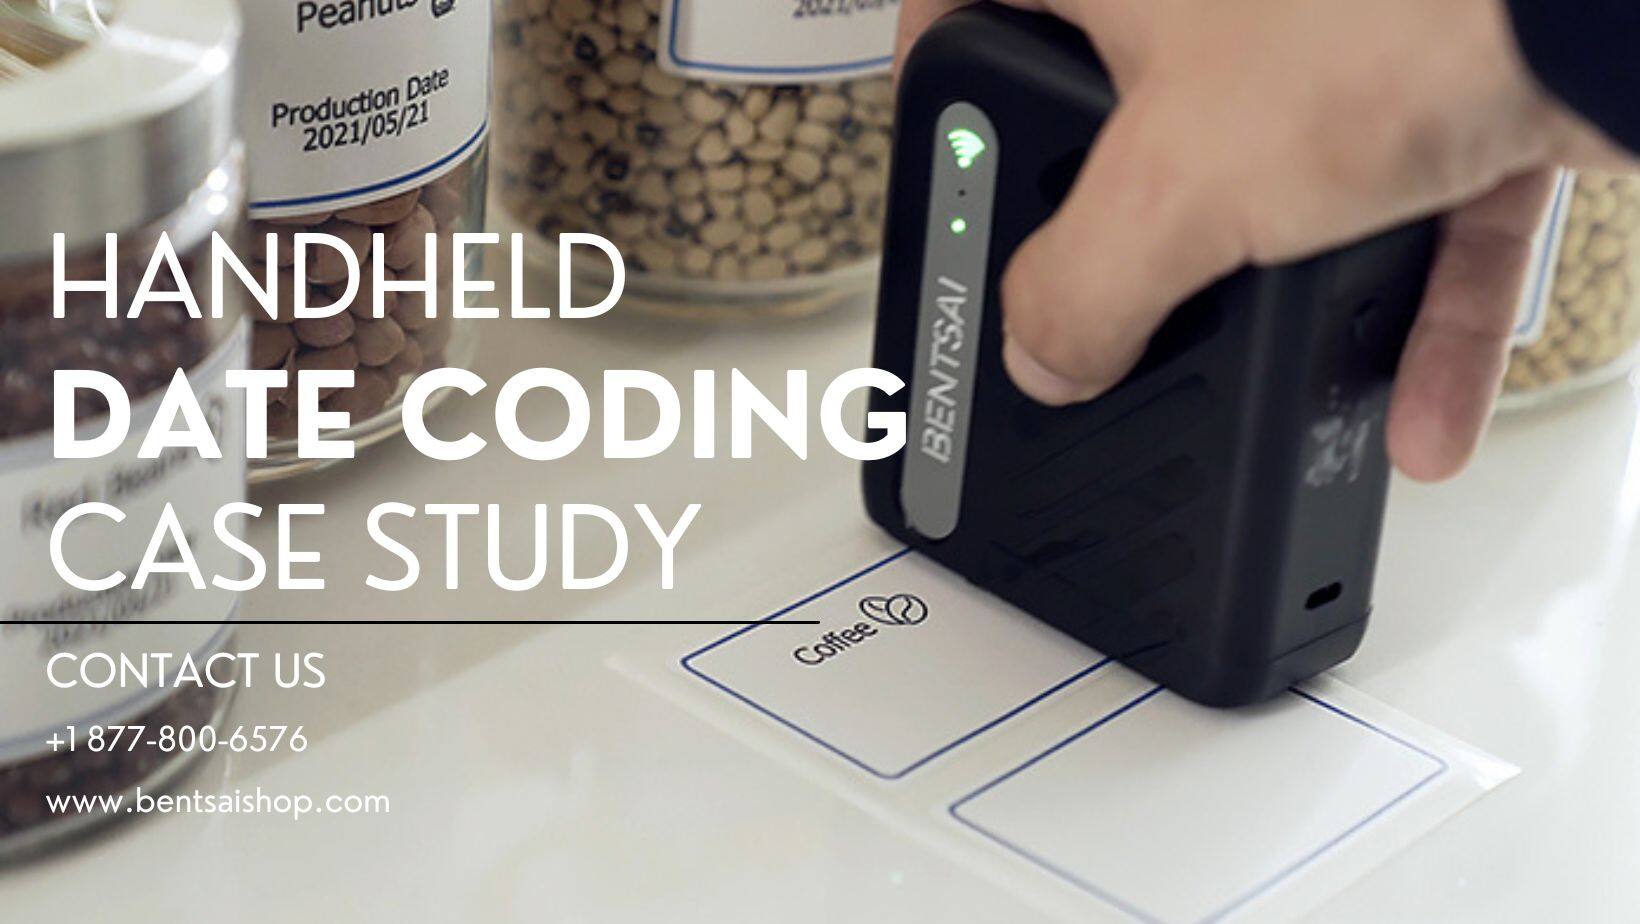 Date coding with handheld printers